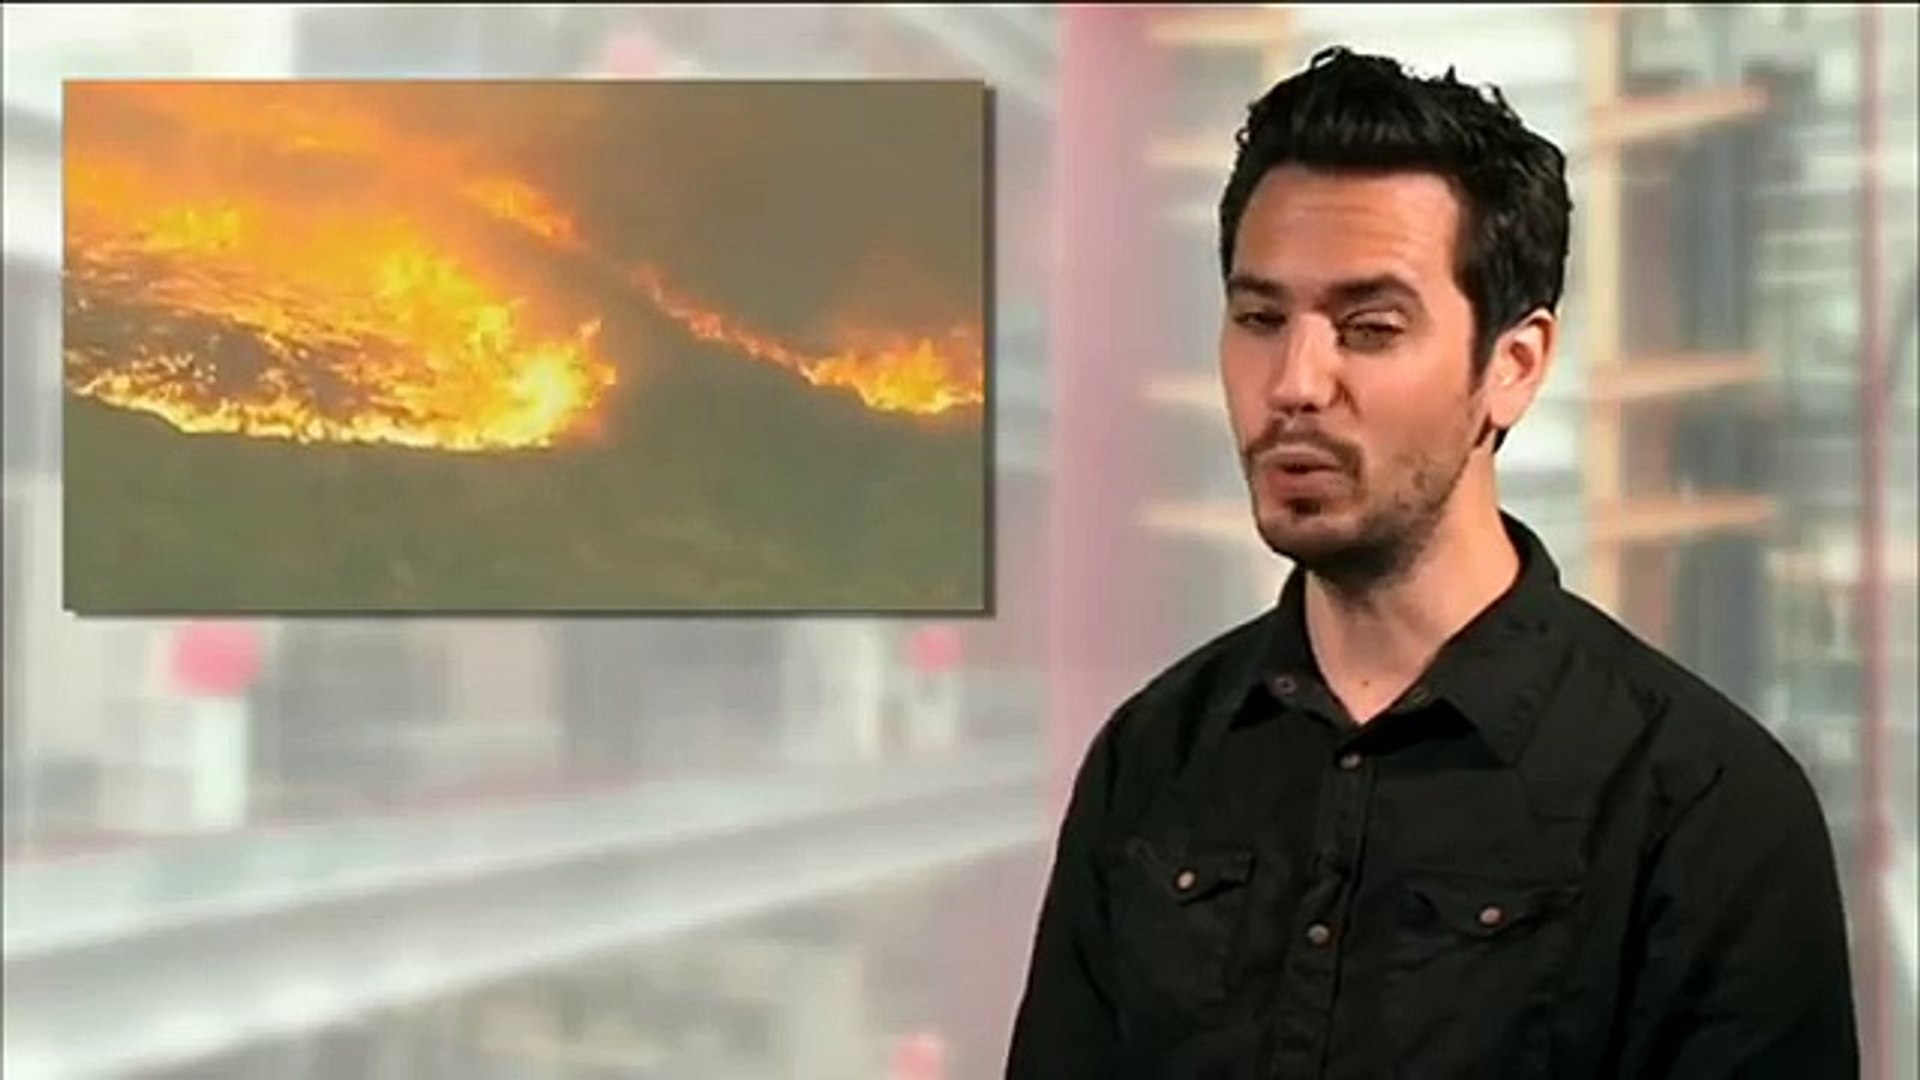 BBC Learning English: Video Words in the News: Forest fires hit the US (3 July 2013)